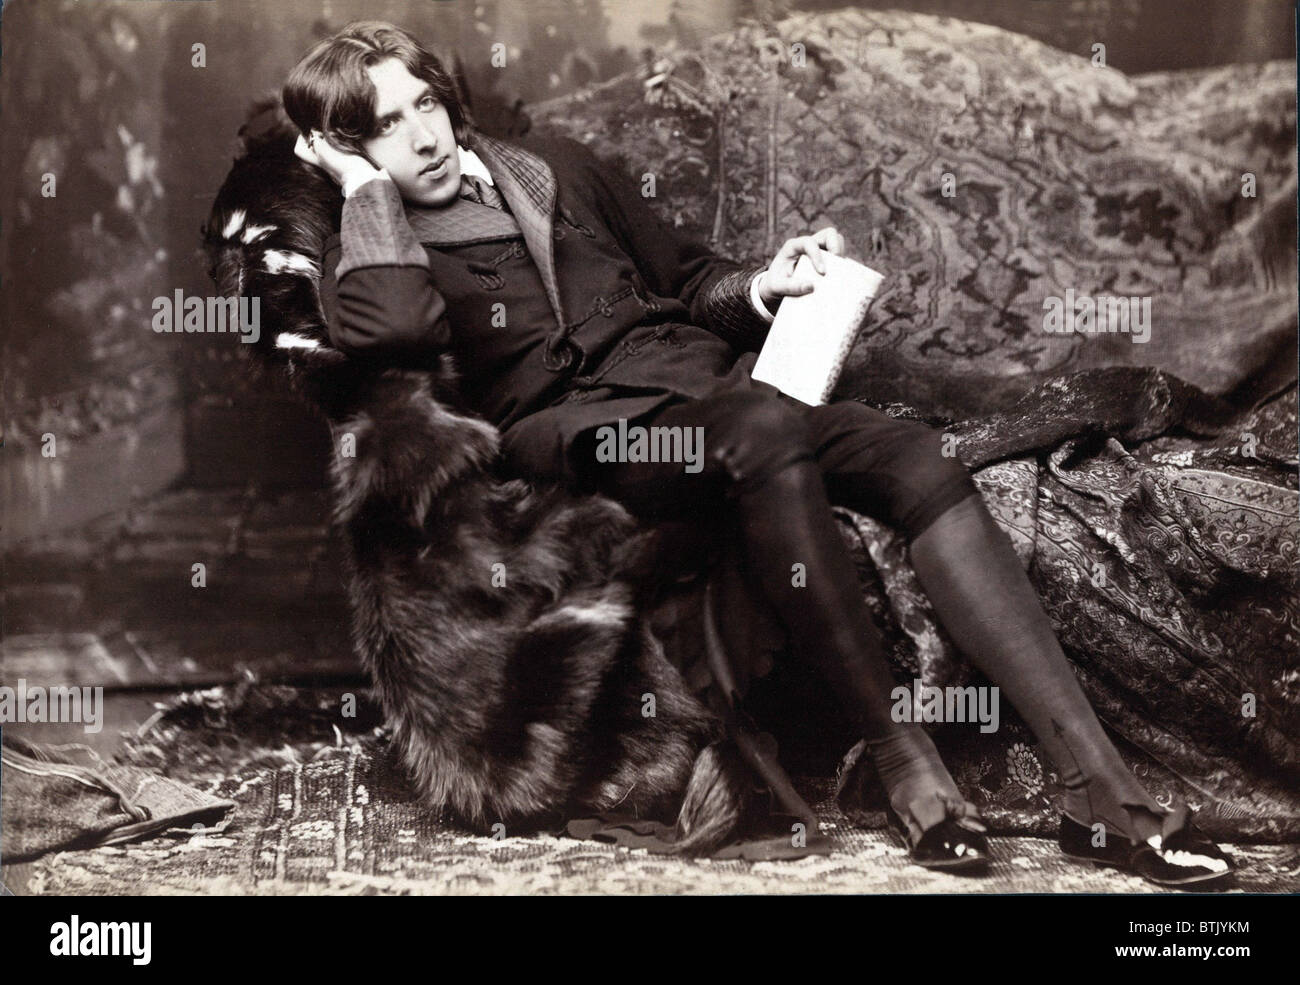 Oscar Wilde, (1854-1900) Irish literary author of, THE PORTRAIT OF DORIAN GRAY (1891), LADY WINDERMERE'S FAN (1892), and THE IMPORTANCE OF BEING EARNEST (1895). 1882 studio portrait by Napoleon Sarony. Stock Photo